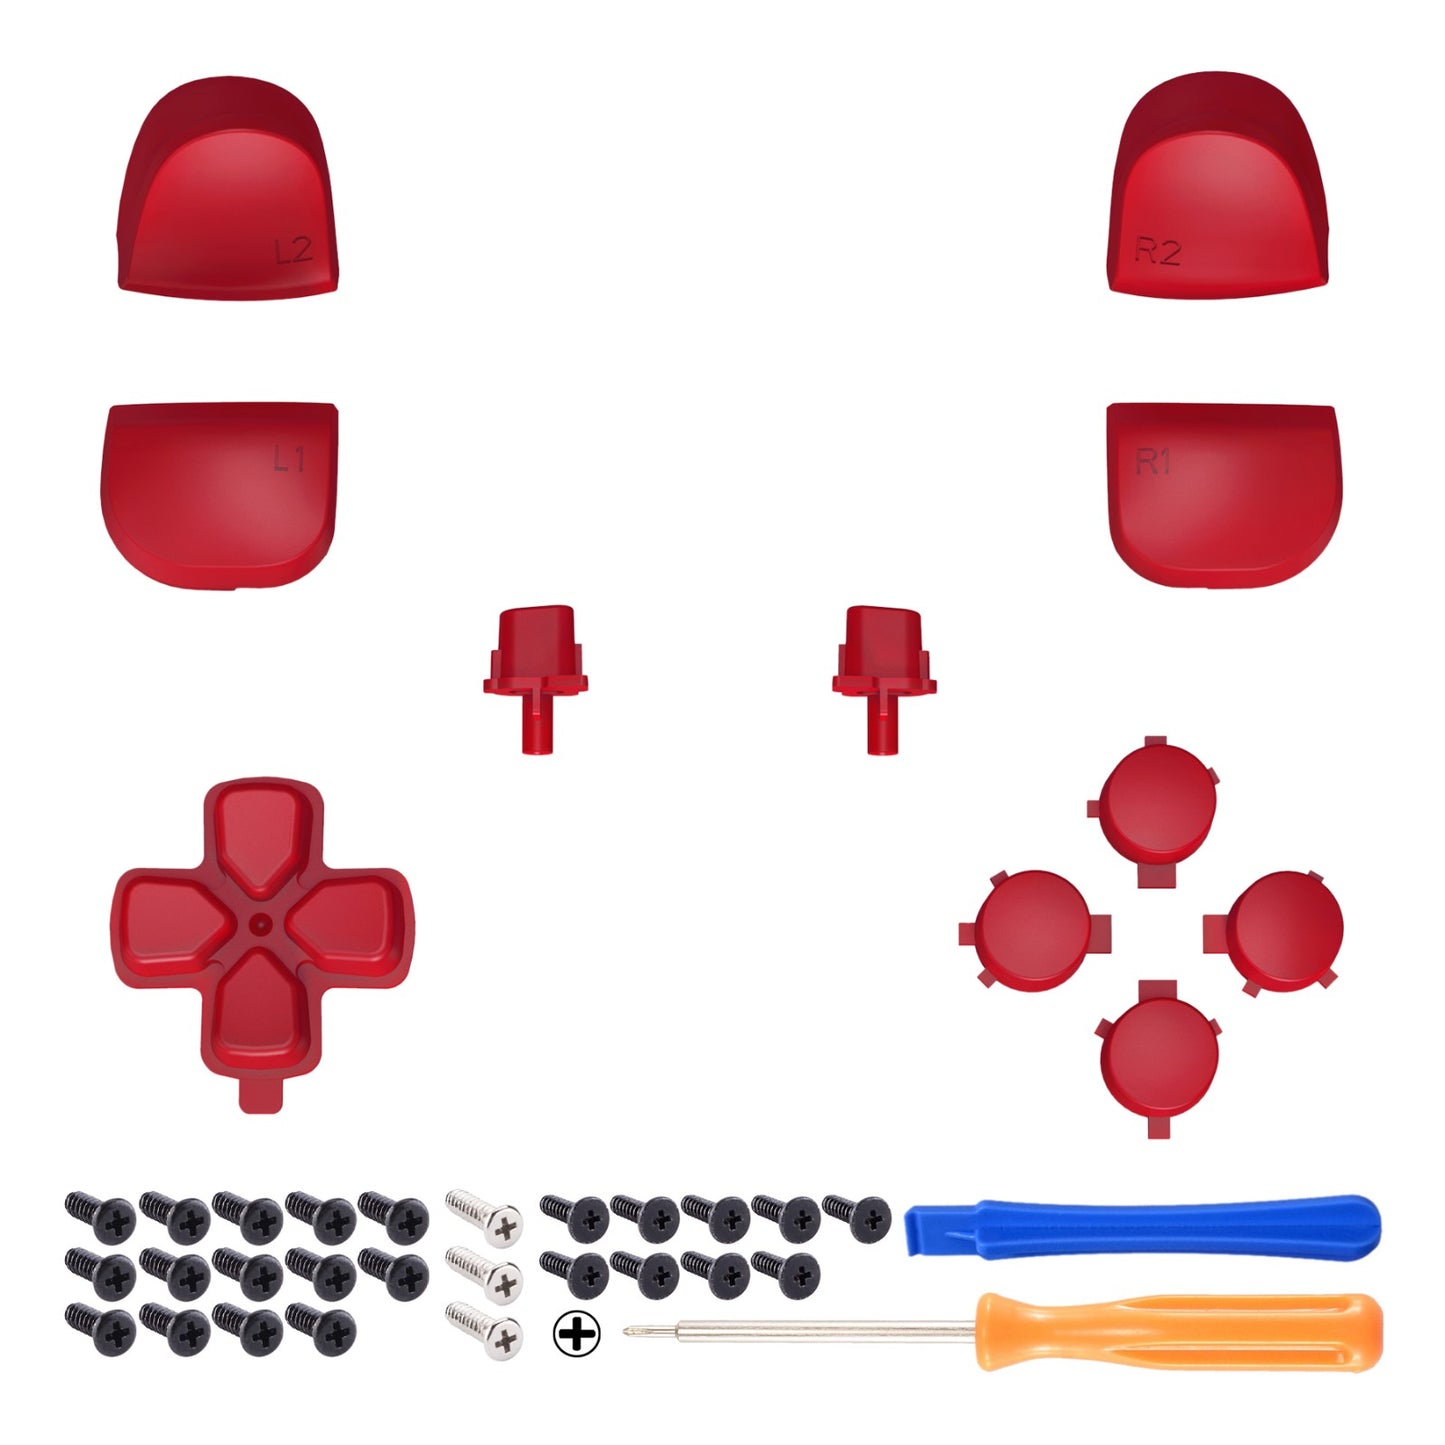 eXtremeRate Retail Replacement D-pad R1 L1 R2 L2 Triggers Share Options Face Buttons, Passion Red Full Set Buttons Compatible with ps5 Controller BDM-010 & BDM-020 - JPF1021G2